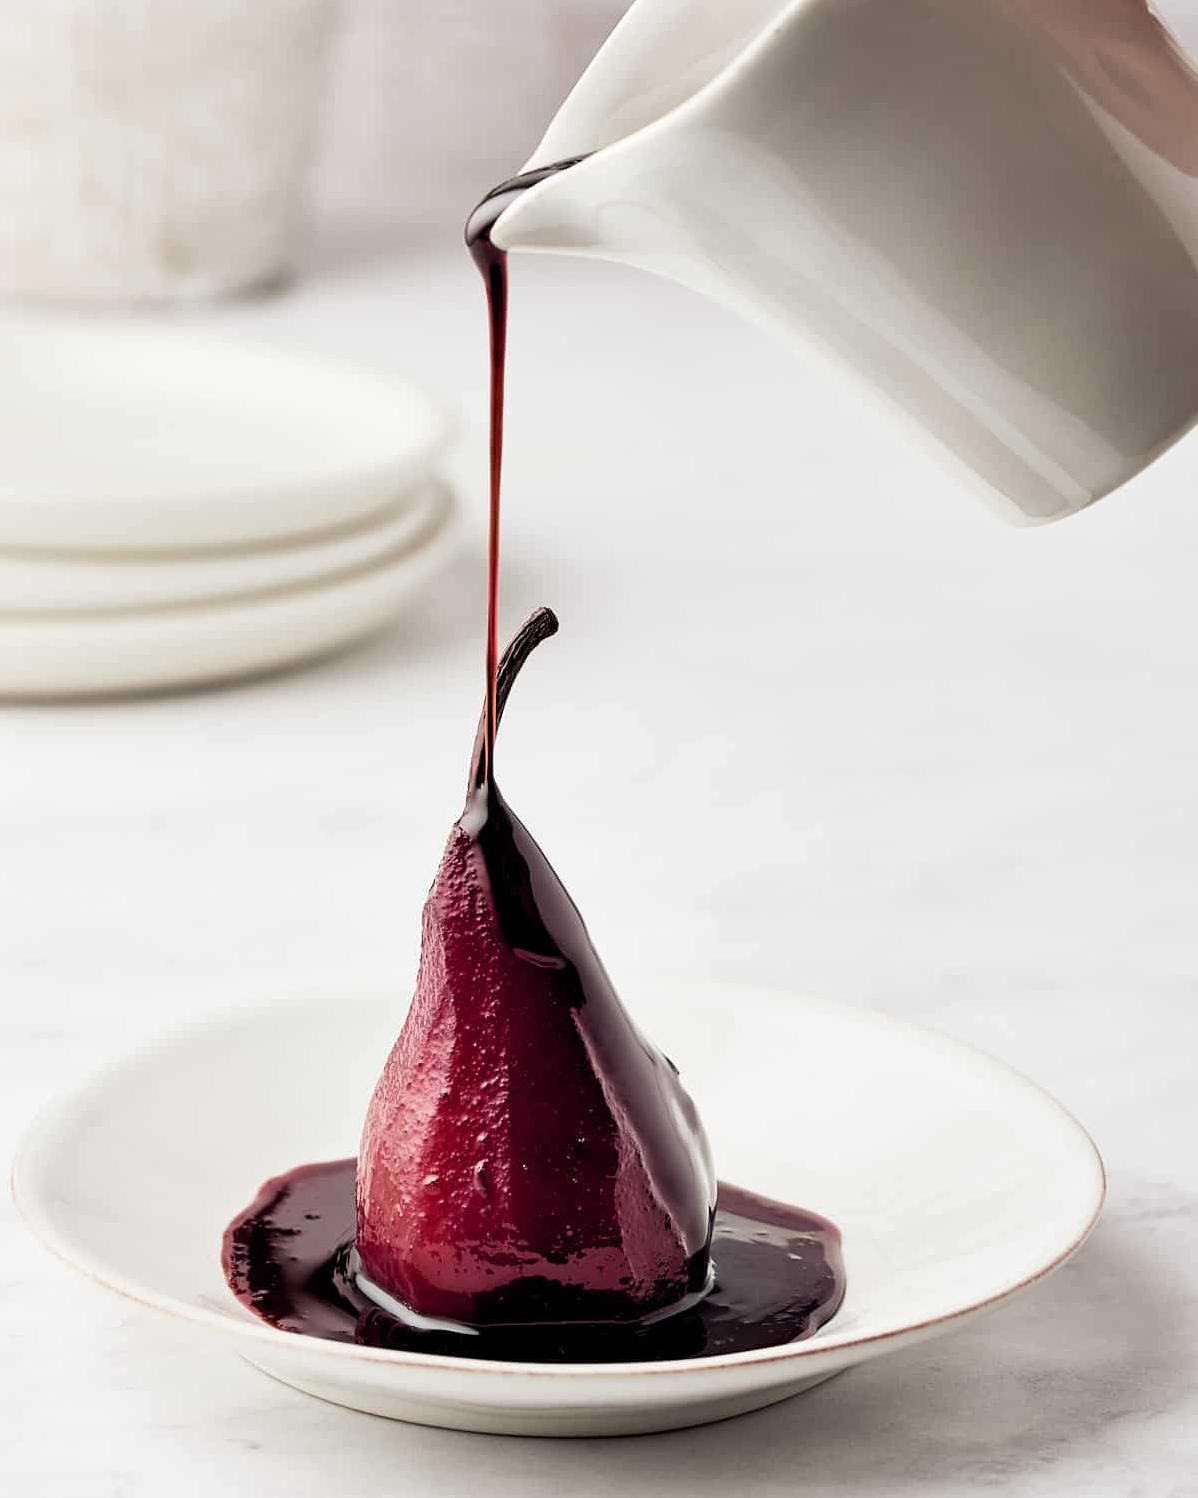  The wine sauce is the perfect finishing touch to these gorgeous pears.